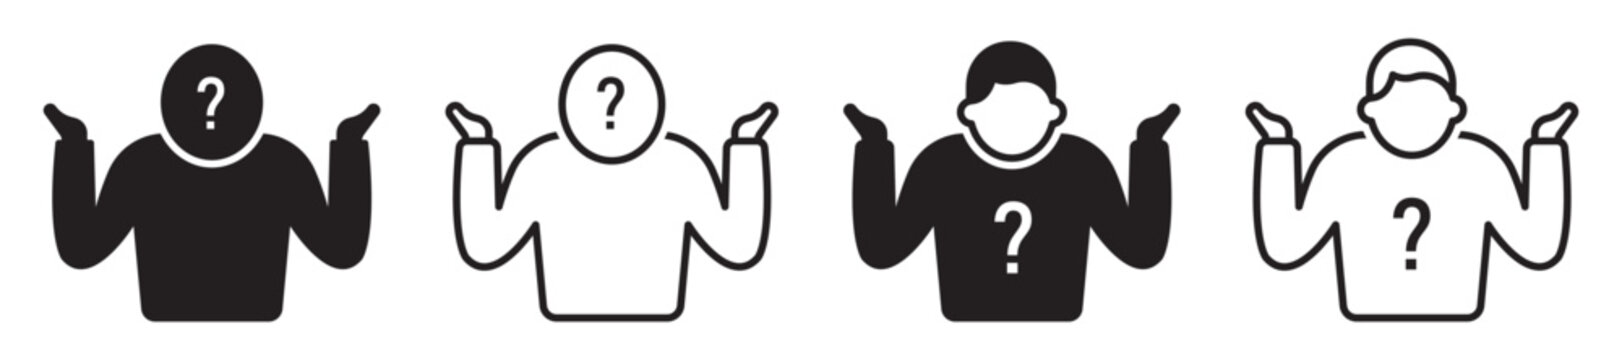 Set of shrug icons, doubt. Question mark, unsure, people, man. Vector.